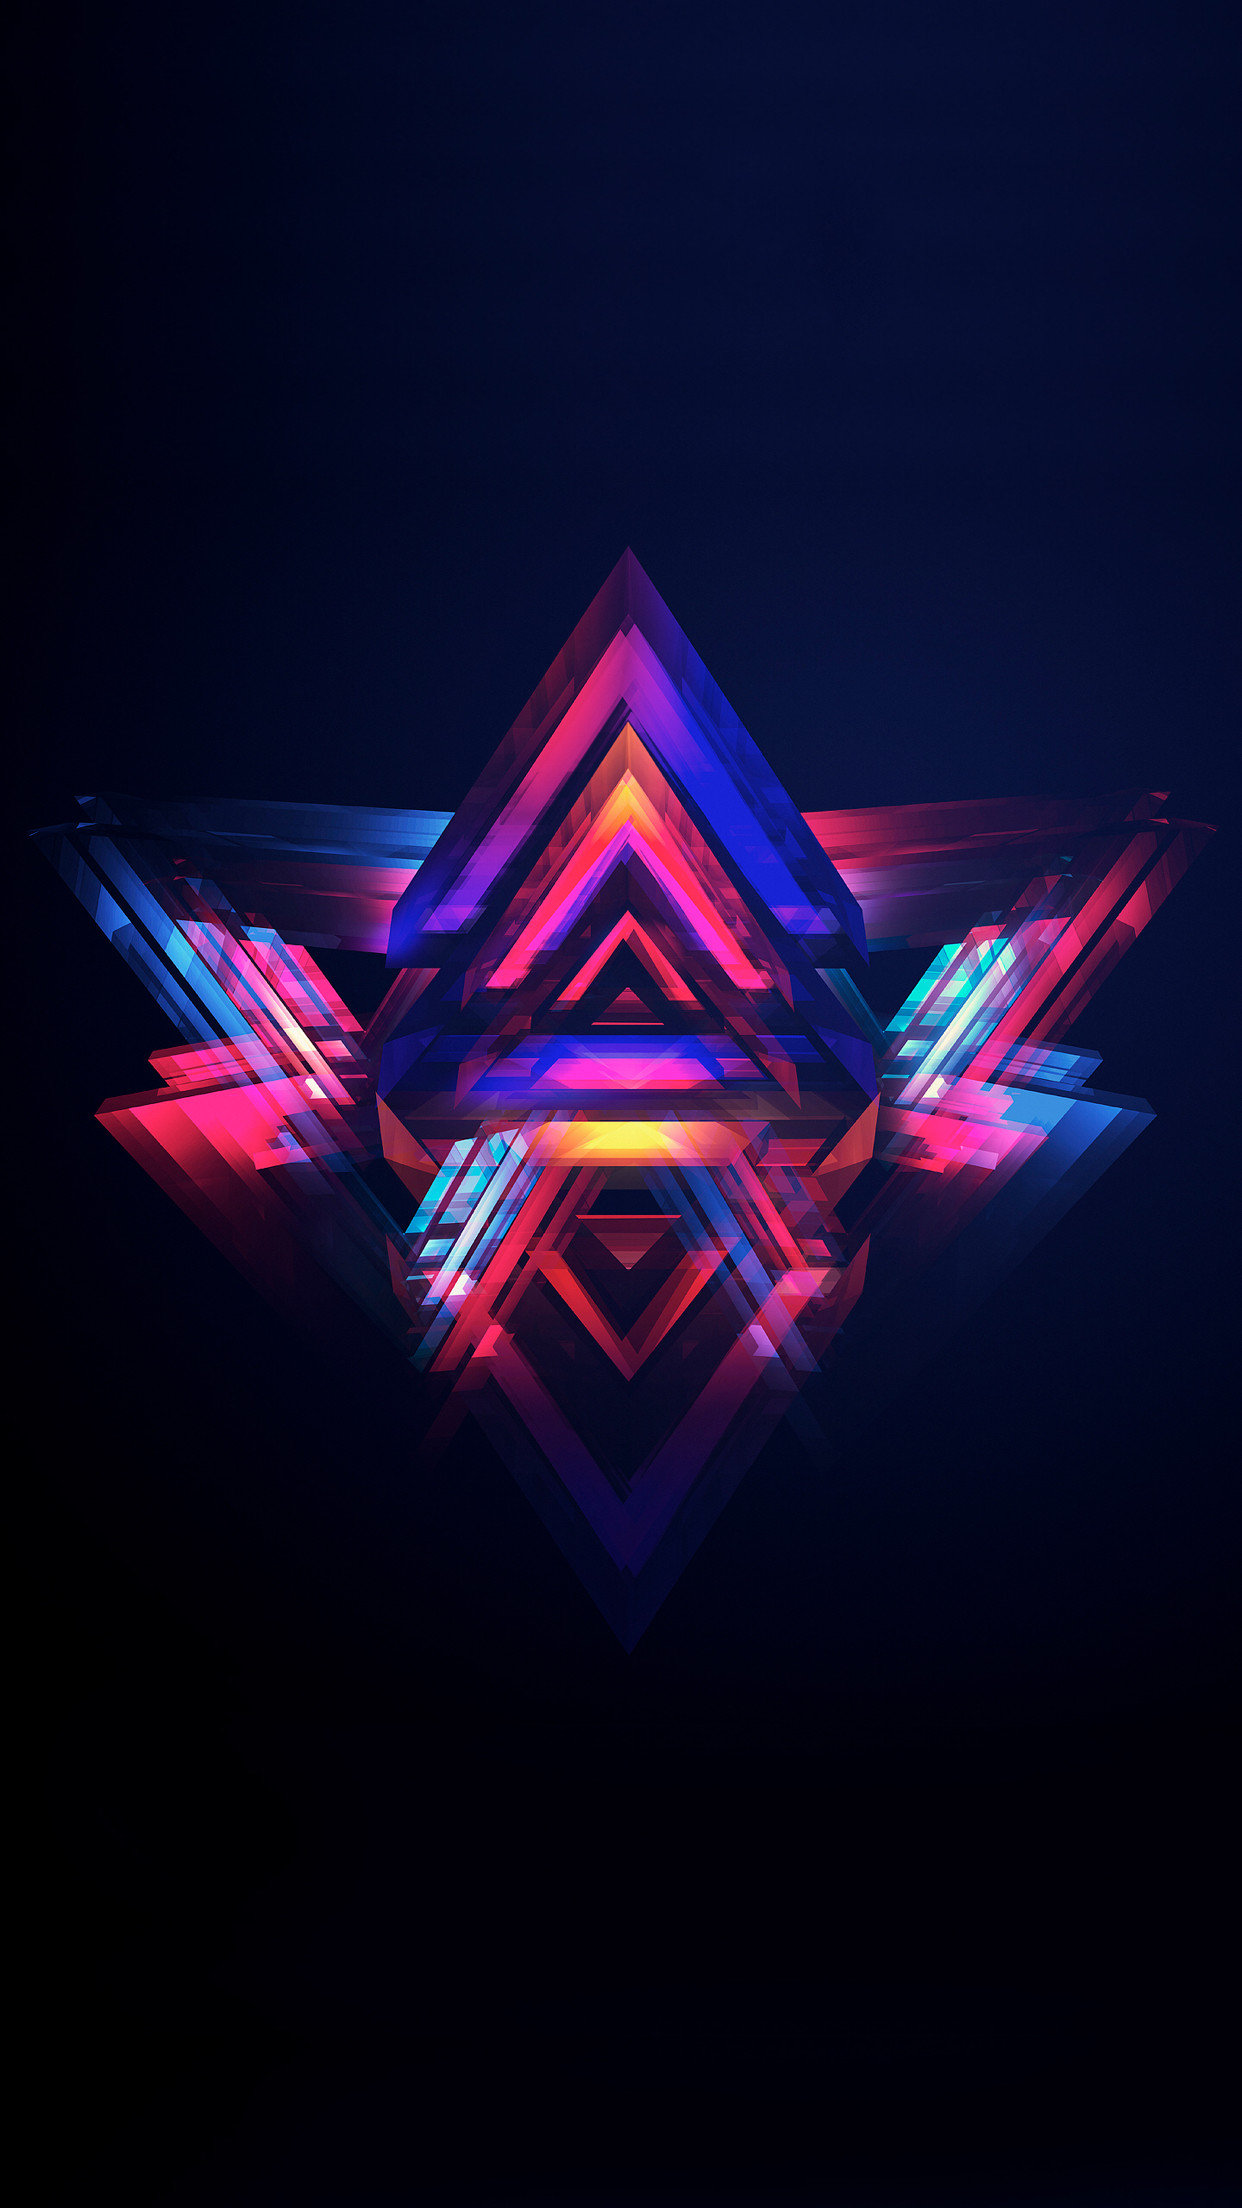 1242x2208 Free Abstract Pyramids phone wallpaper by Create and share your own  ringtones, videos, themes and cell phone wallpapers with your friends.